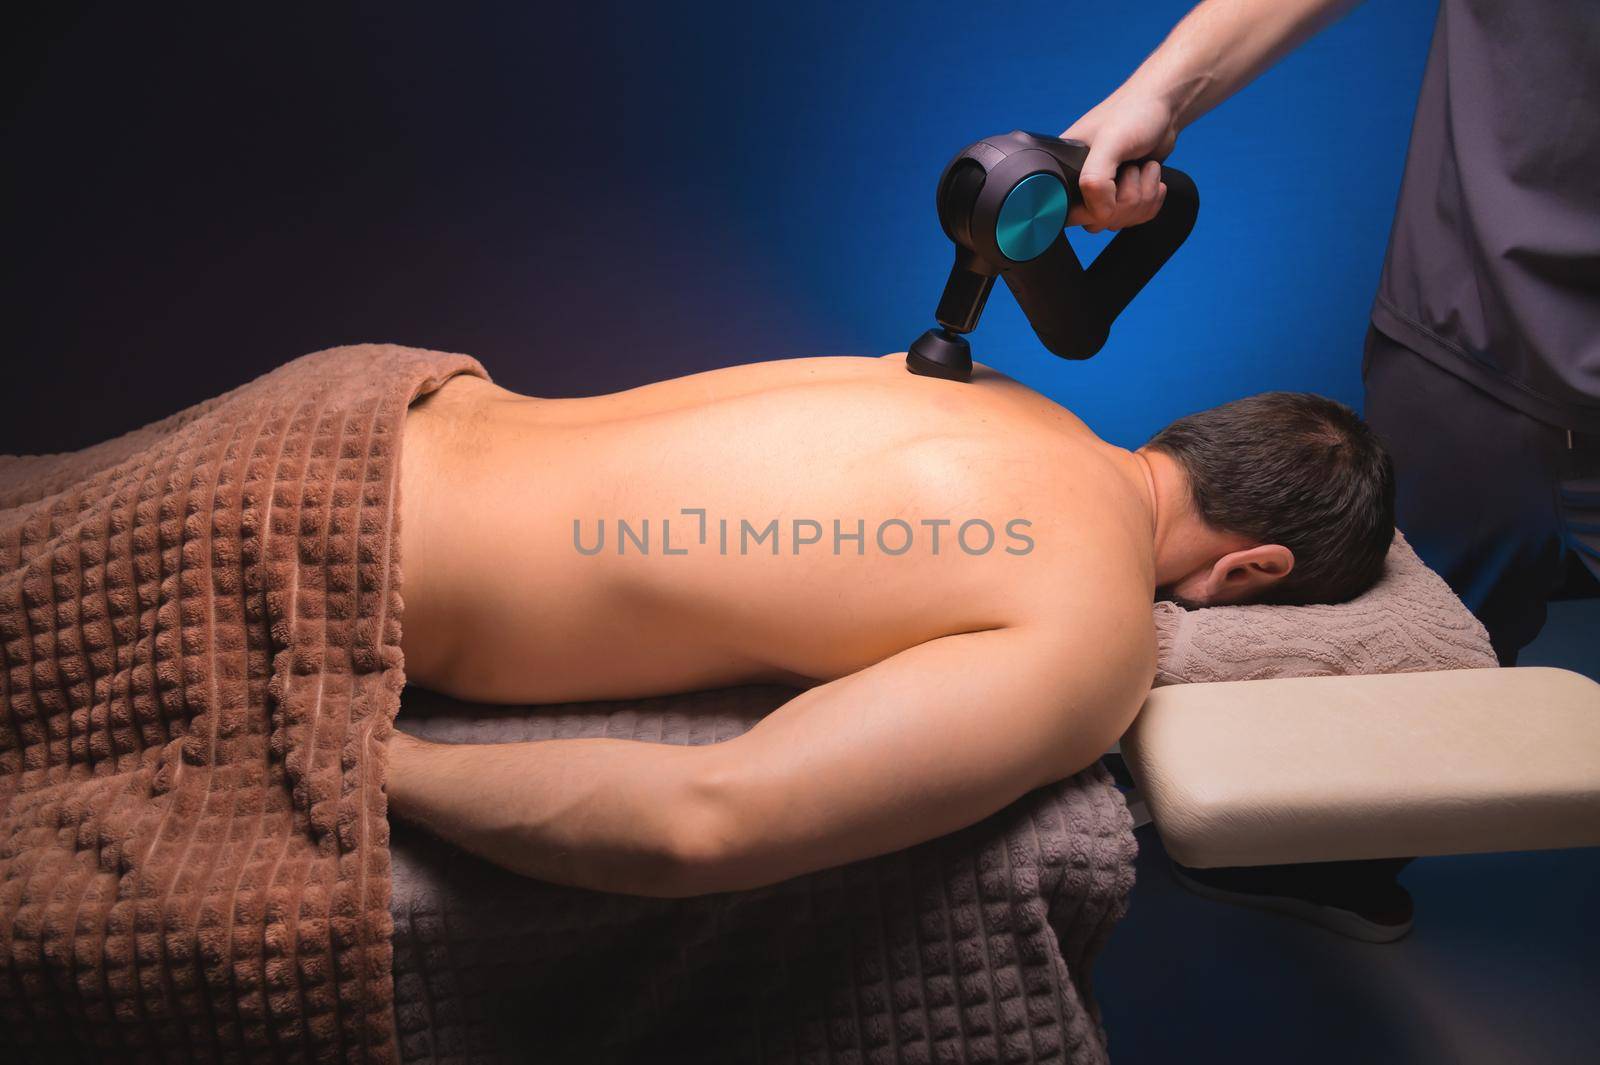 Physiotherapy of the upper back with a percussion massager. Therapist kneads the patient's upper back.